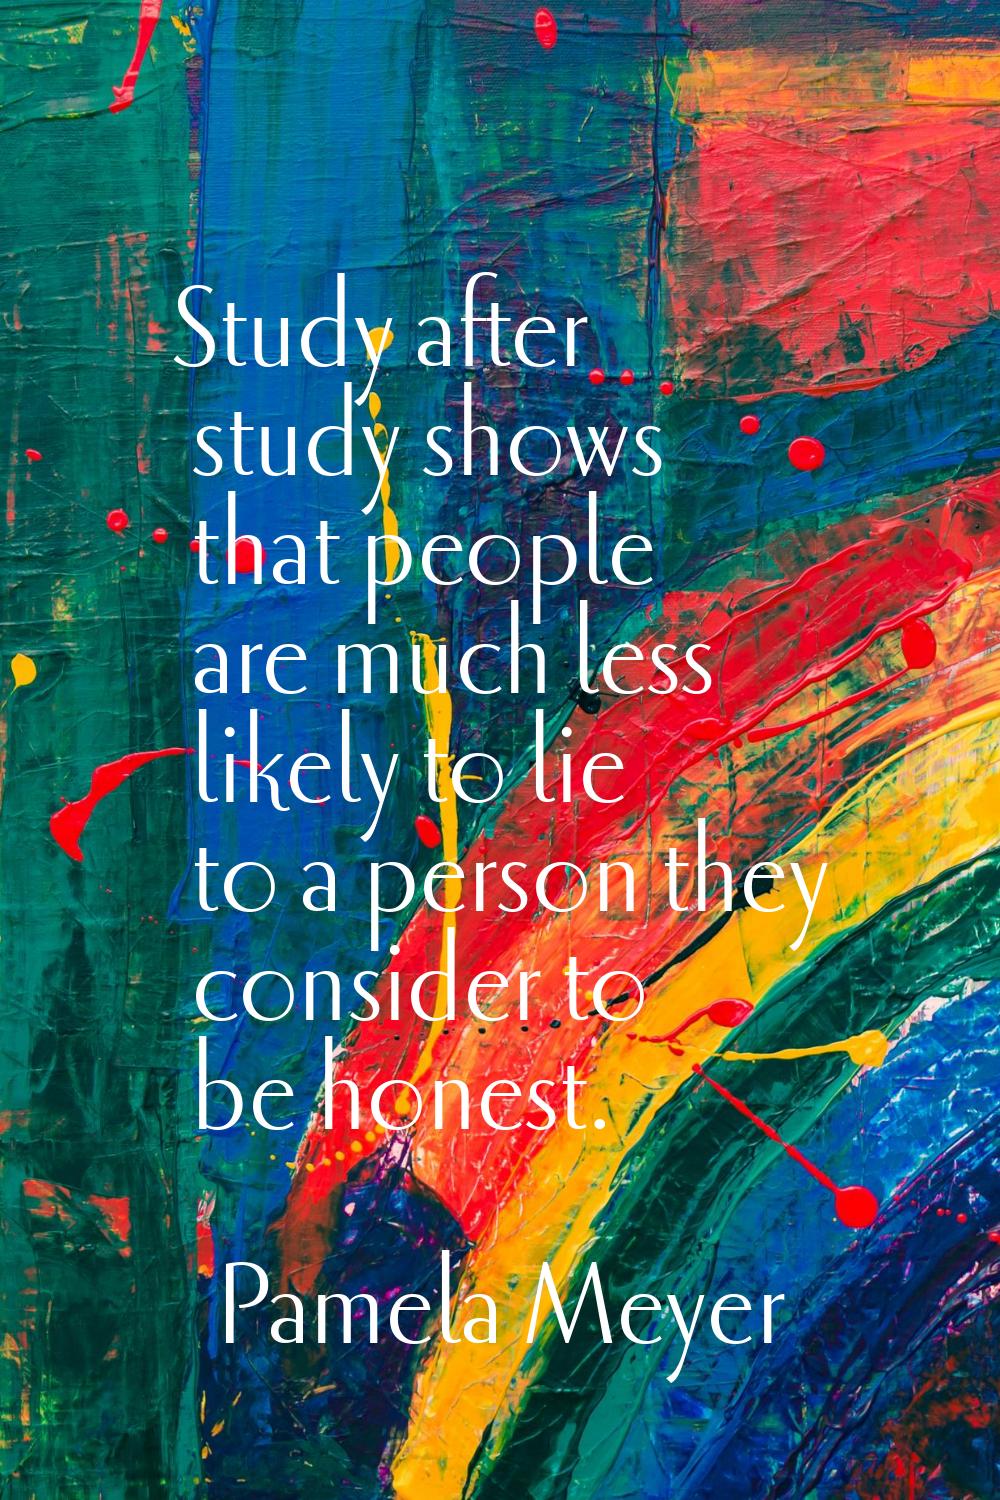 Study after study shows that people are much less likely to lie to a person they consider to be hon